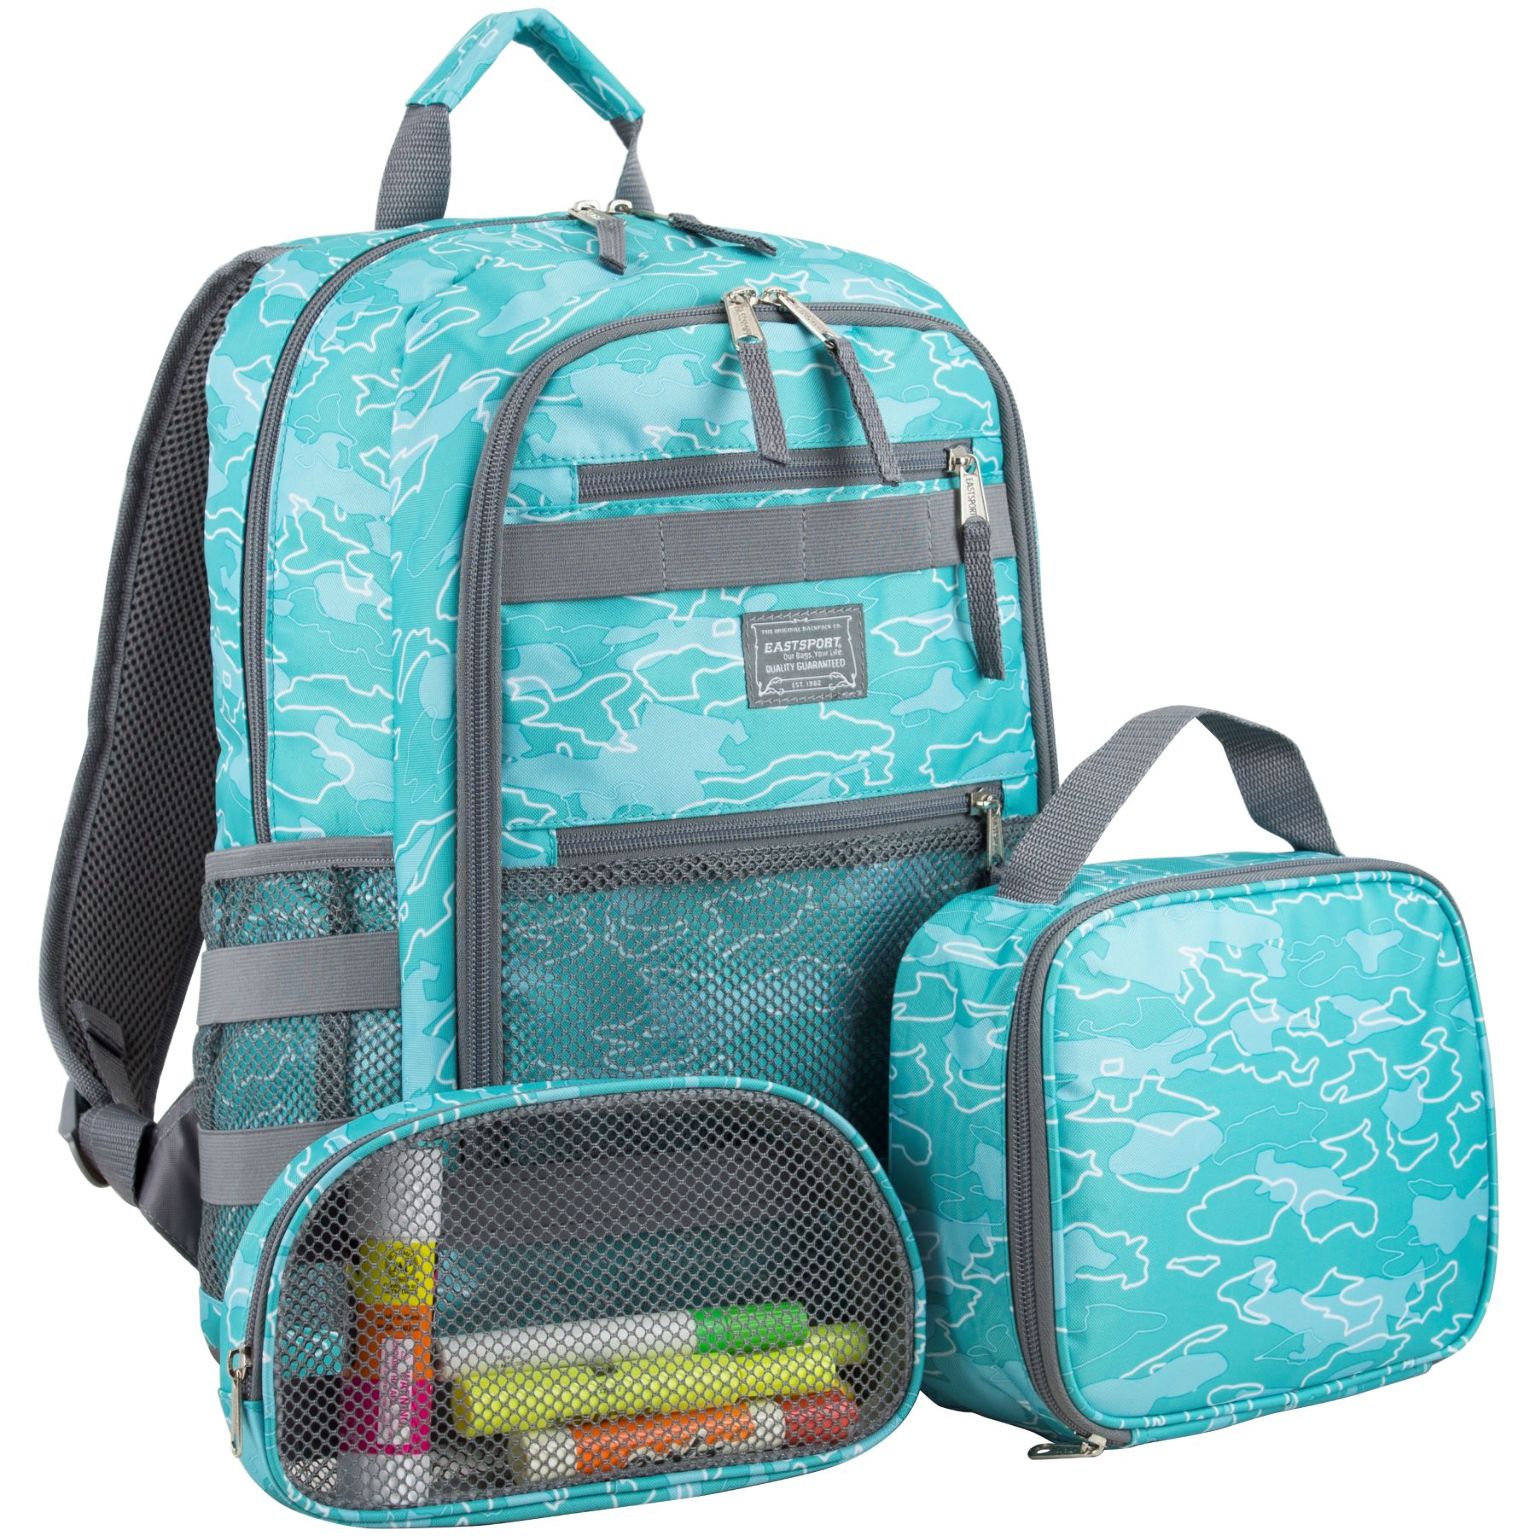 Kids Bags, Luggage, Backpacks, Lunch & More